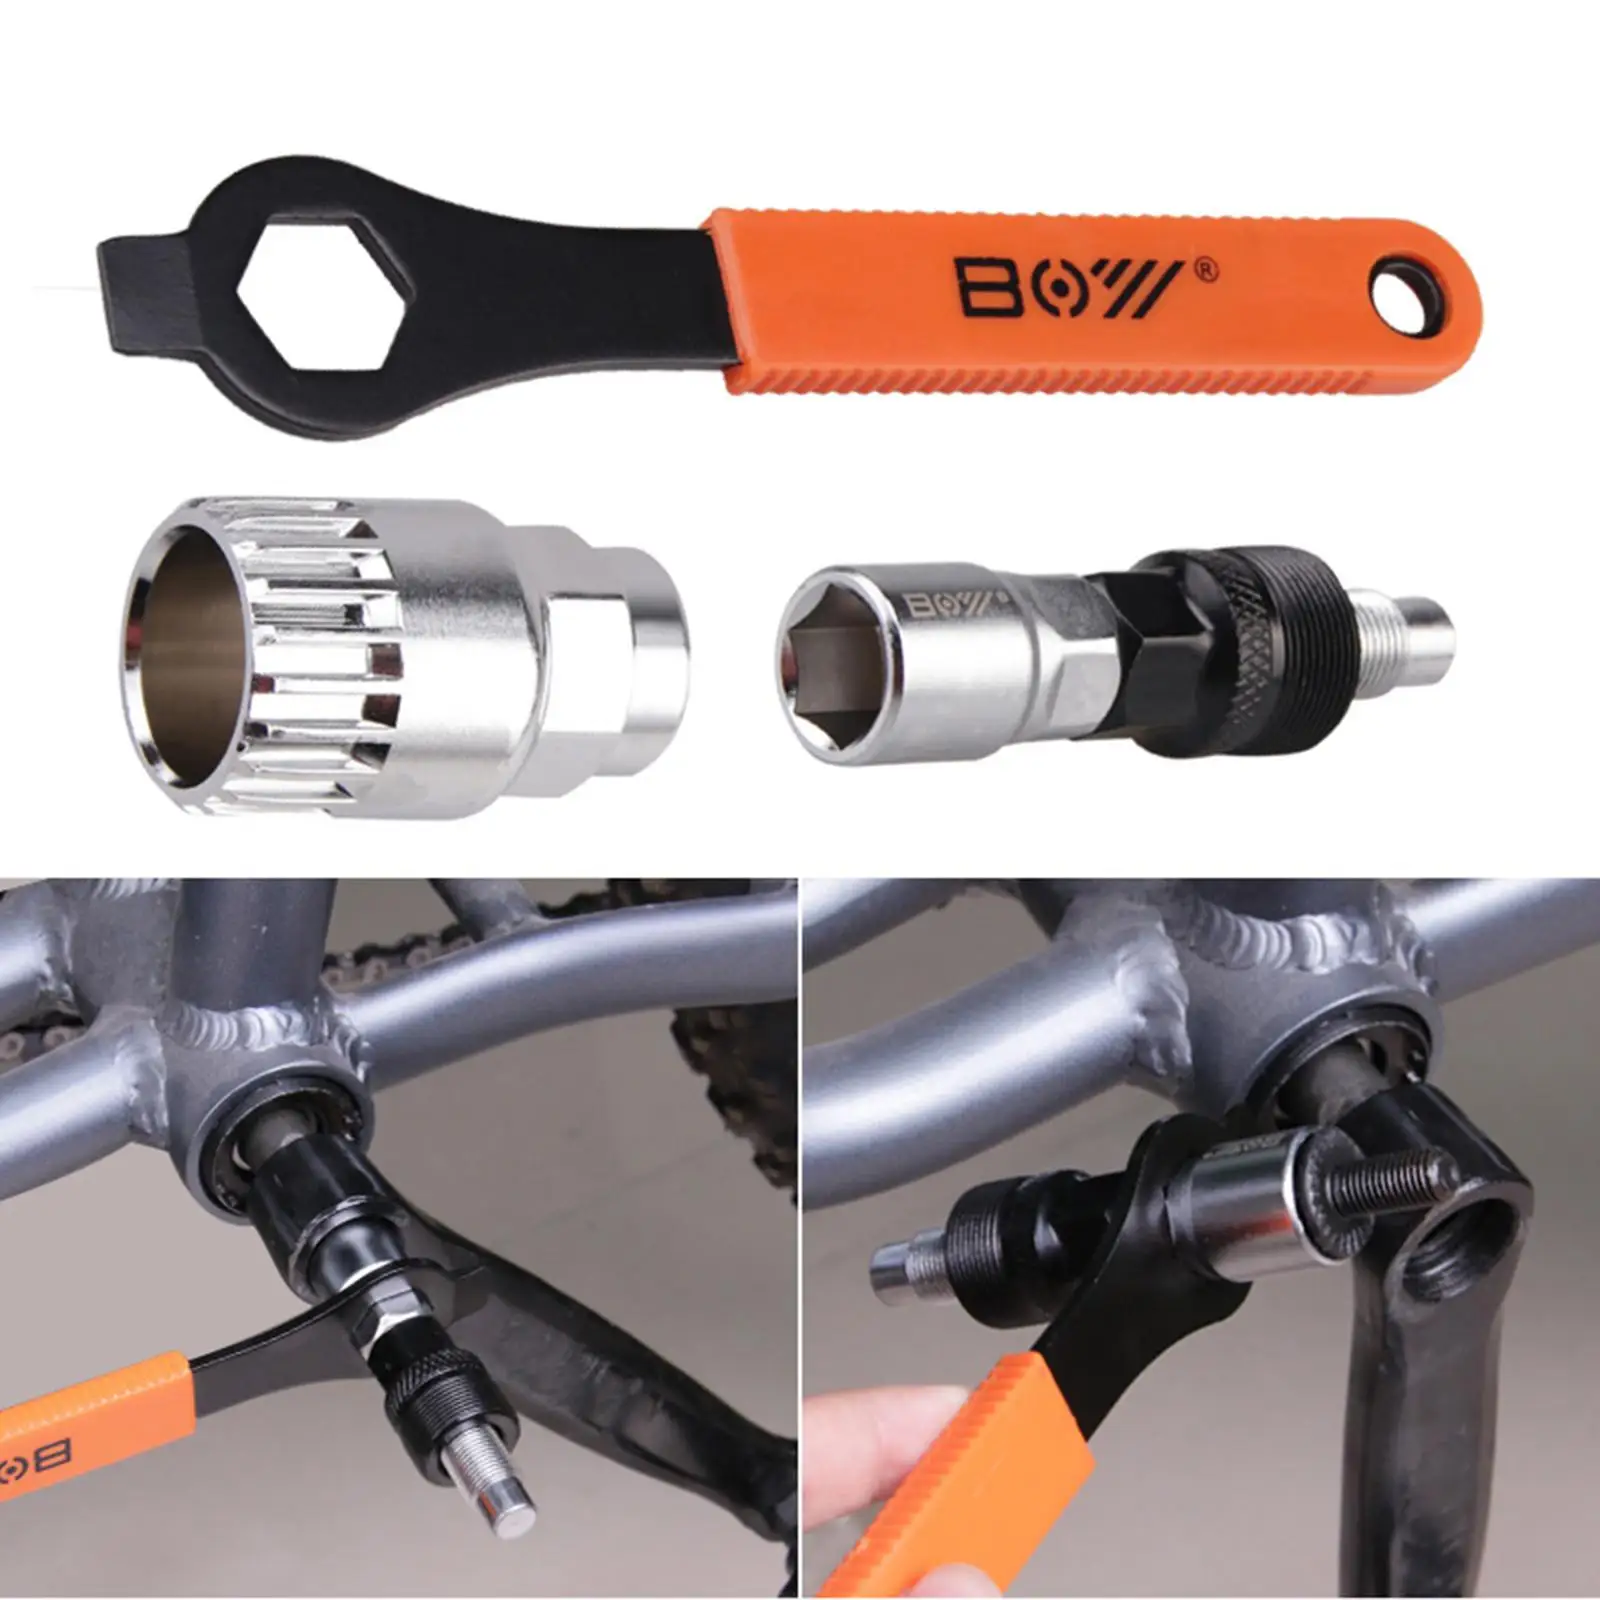 Bottom Bracket Remover Removal Tool with Spanner Bike Crank Extractor Kit